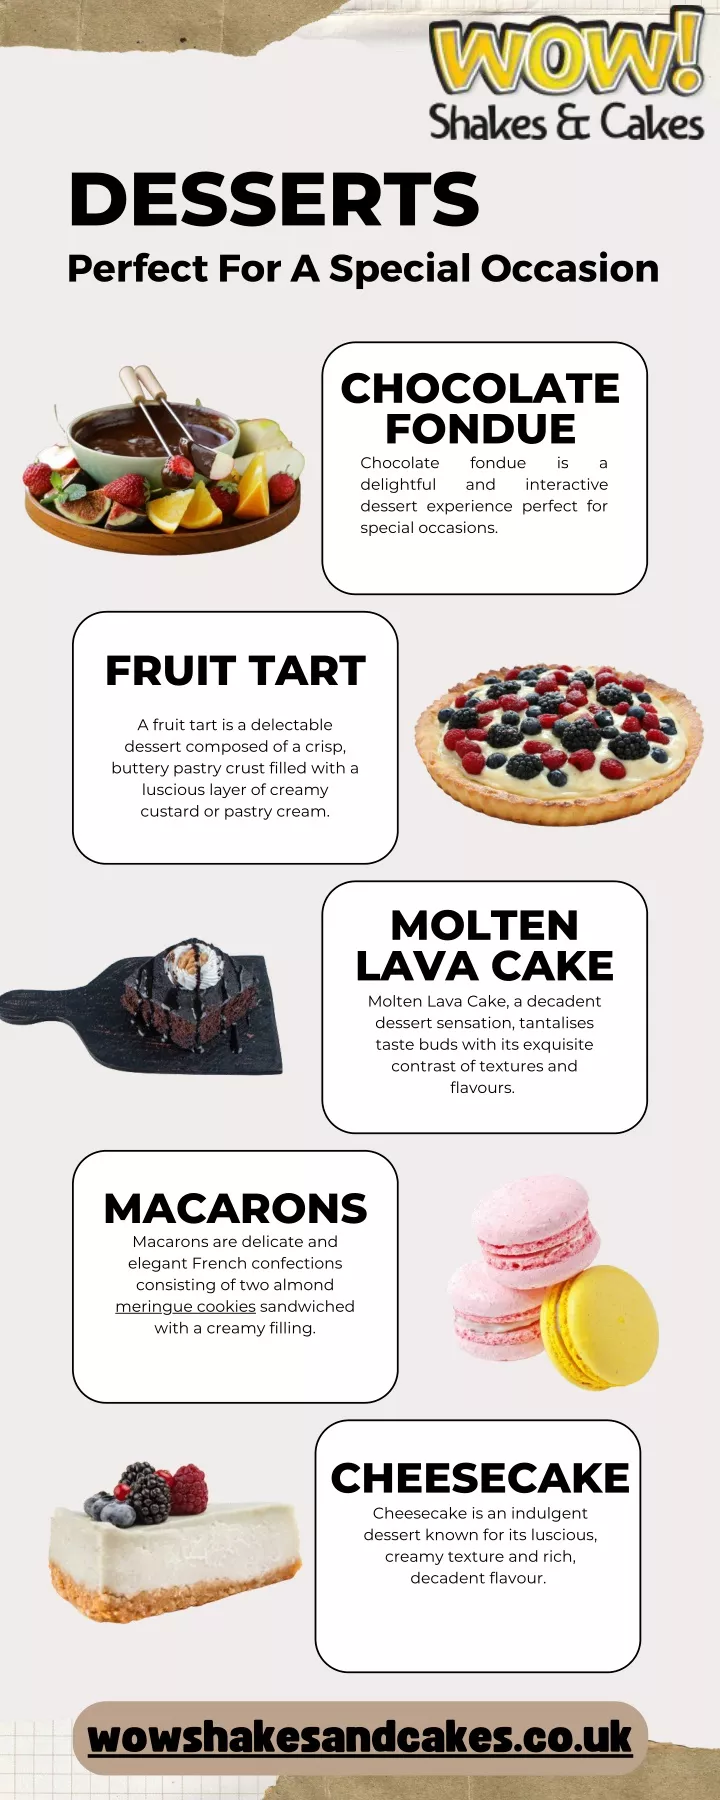 desserts perfect for a special occasion